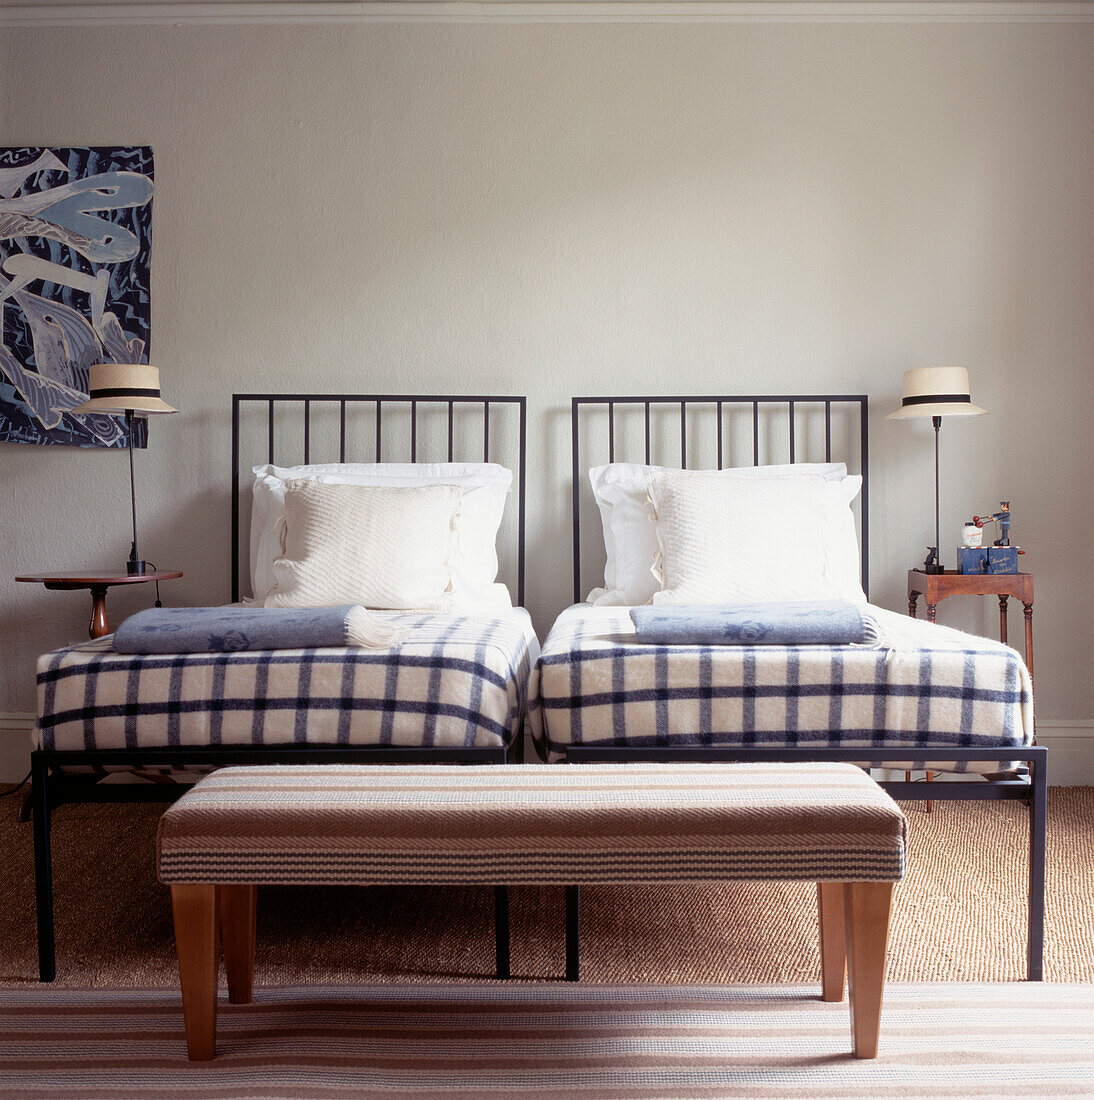 Guest bedroom with twin beds and quirky bedside 'hat' lamps and Roger Oates rugs and textiles